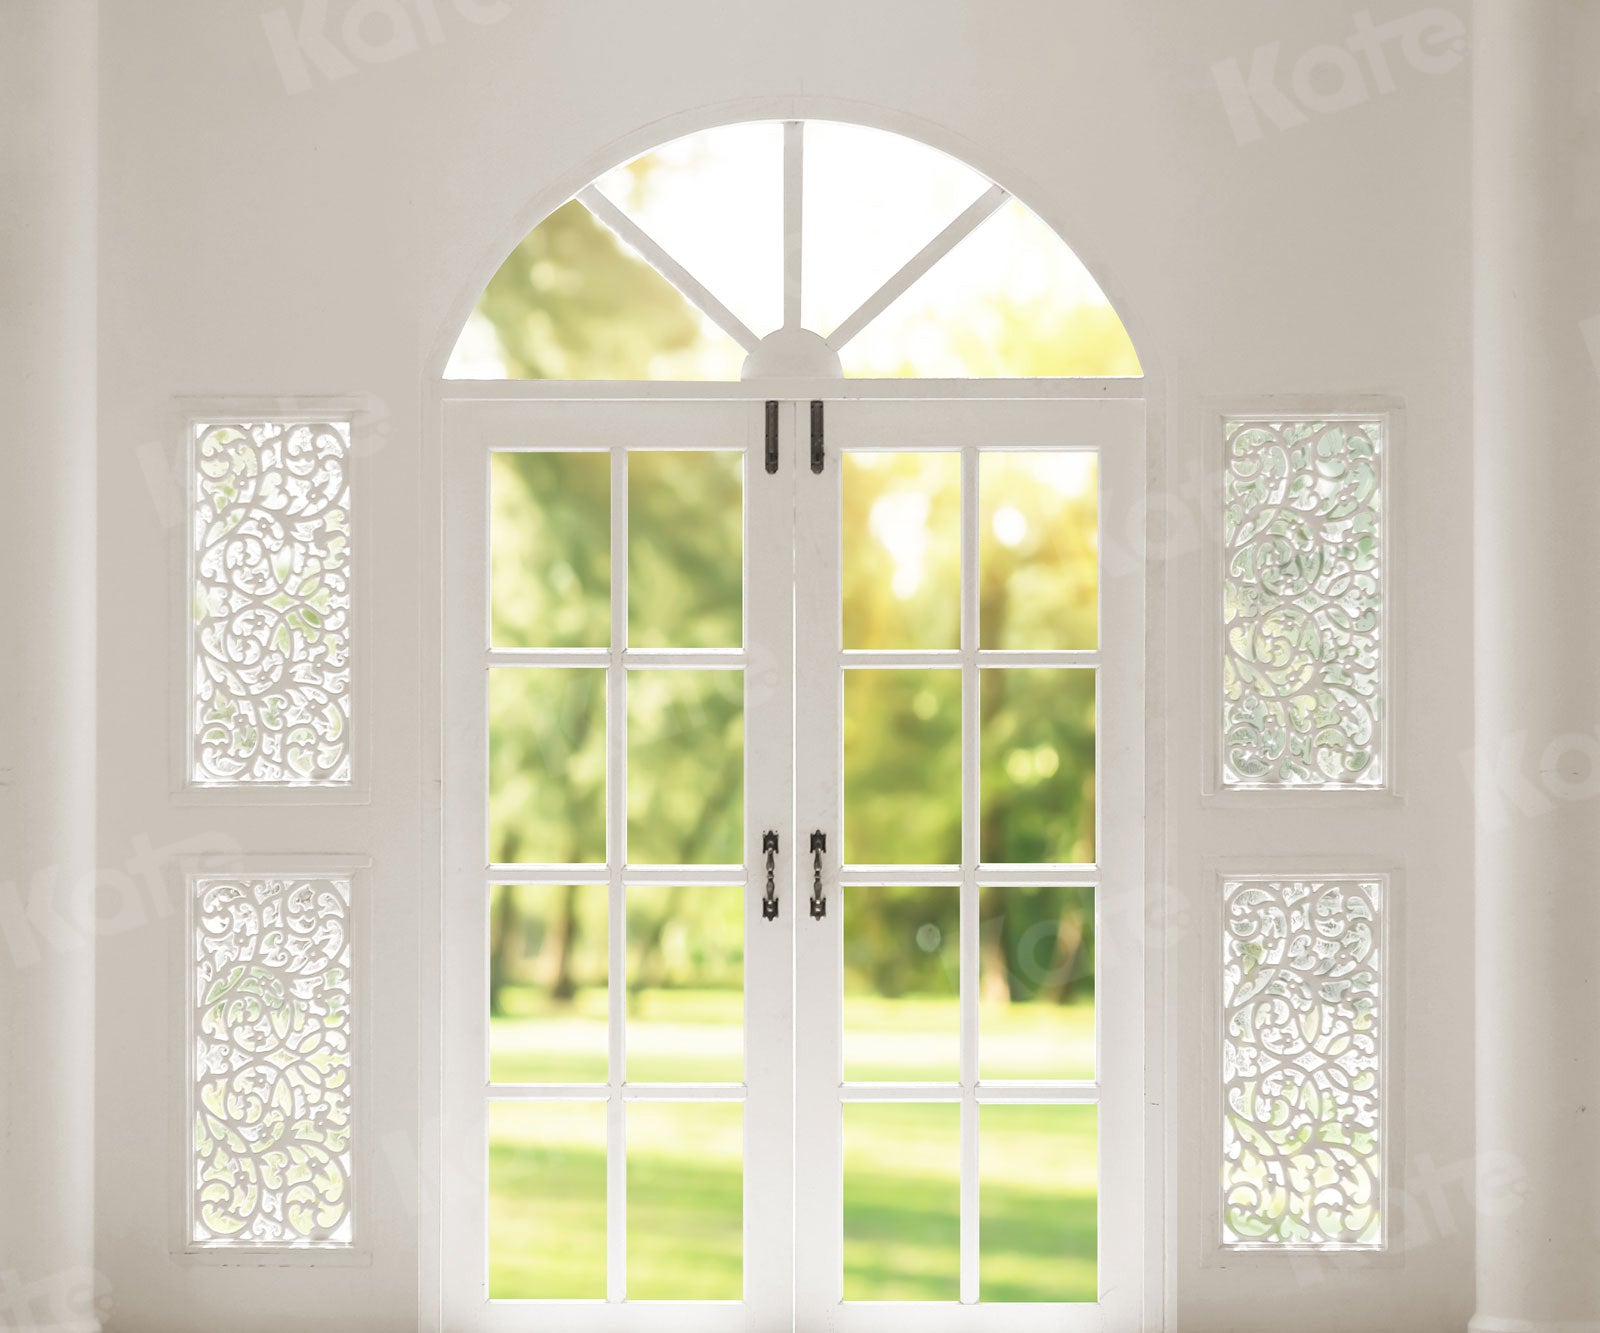 Kate Spring Stylish Door Backdrop White Windows for Photography